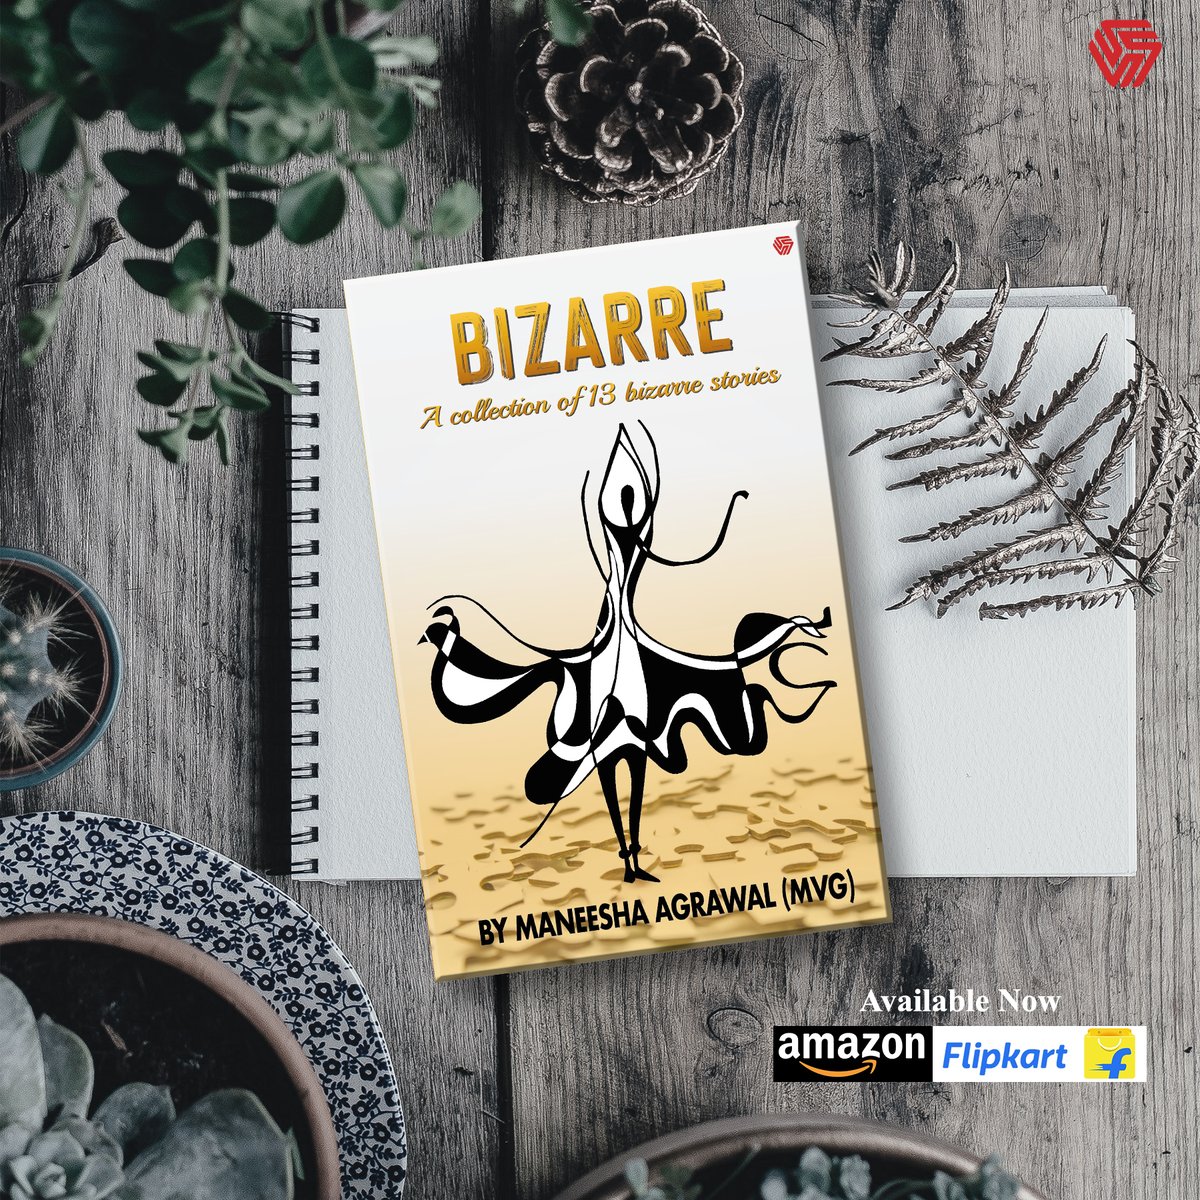 Bizarre' is a collection of 13 short stories...each one laced with an element of surprise for you. The unexpected twist in the tale for a soldier, a curious night at a hospital, the bizarre love story, the weird archaeological expedition, the edgy journey, and a lot more.